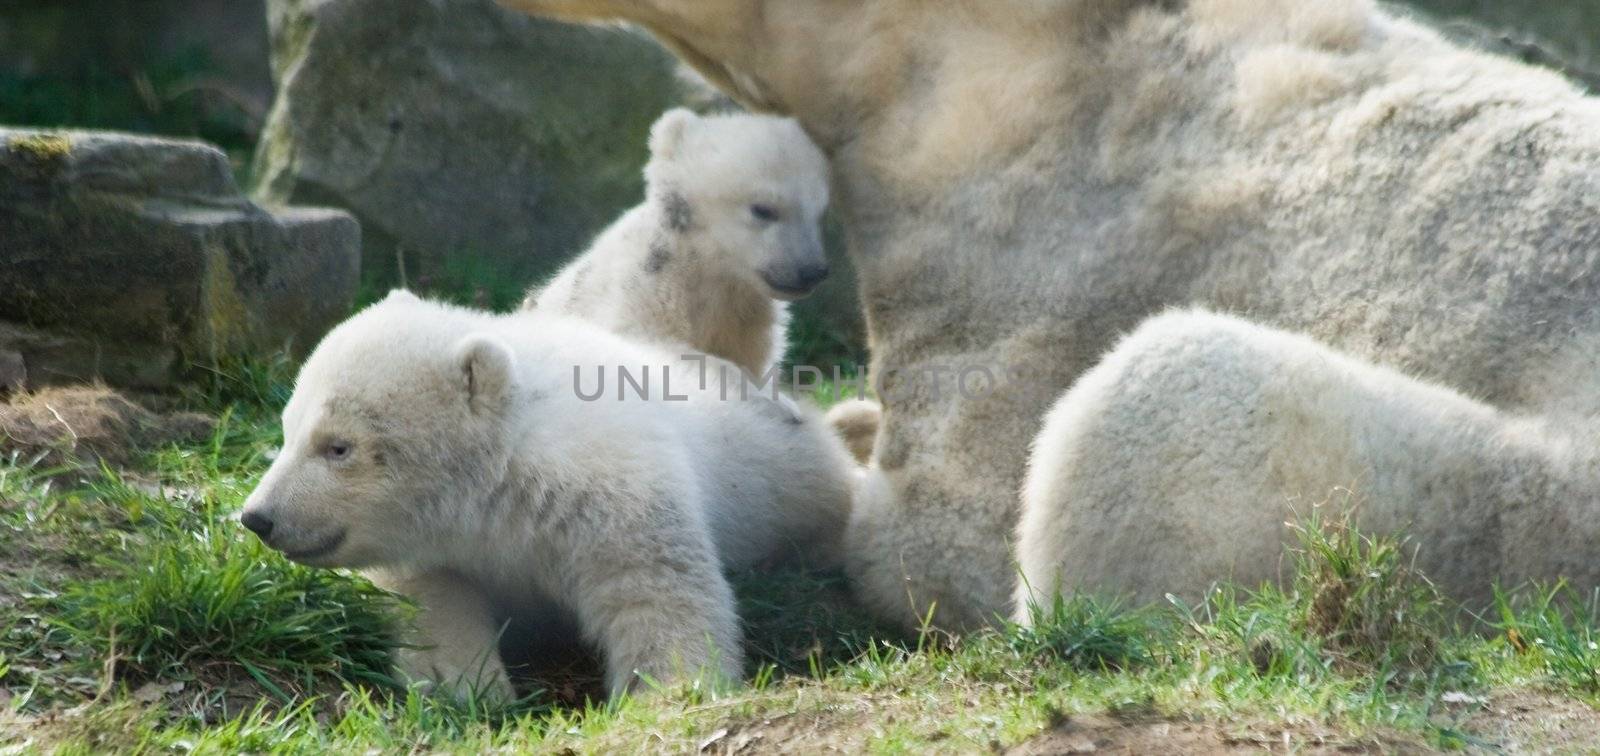 Three polar bears - mother and two kids by Colette